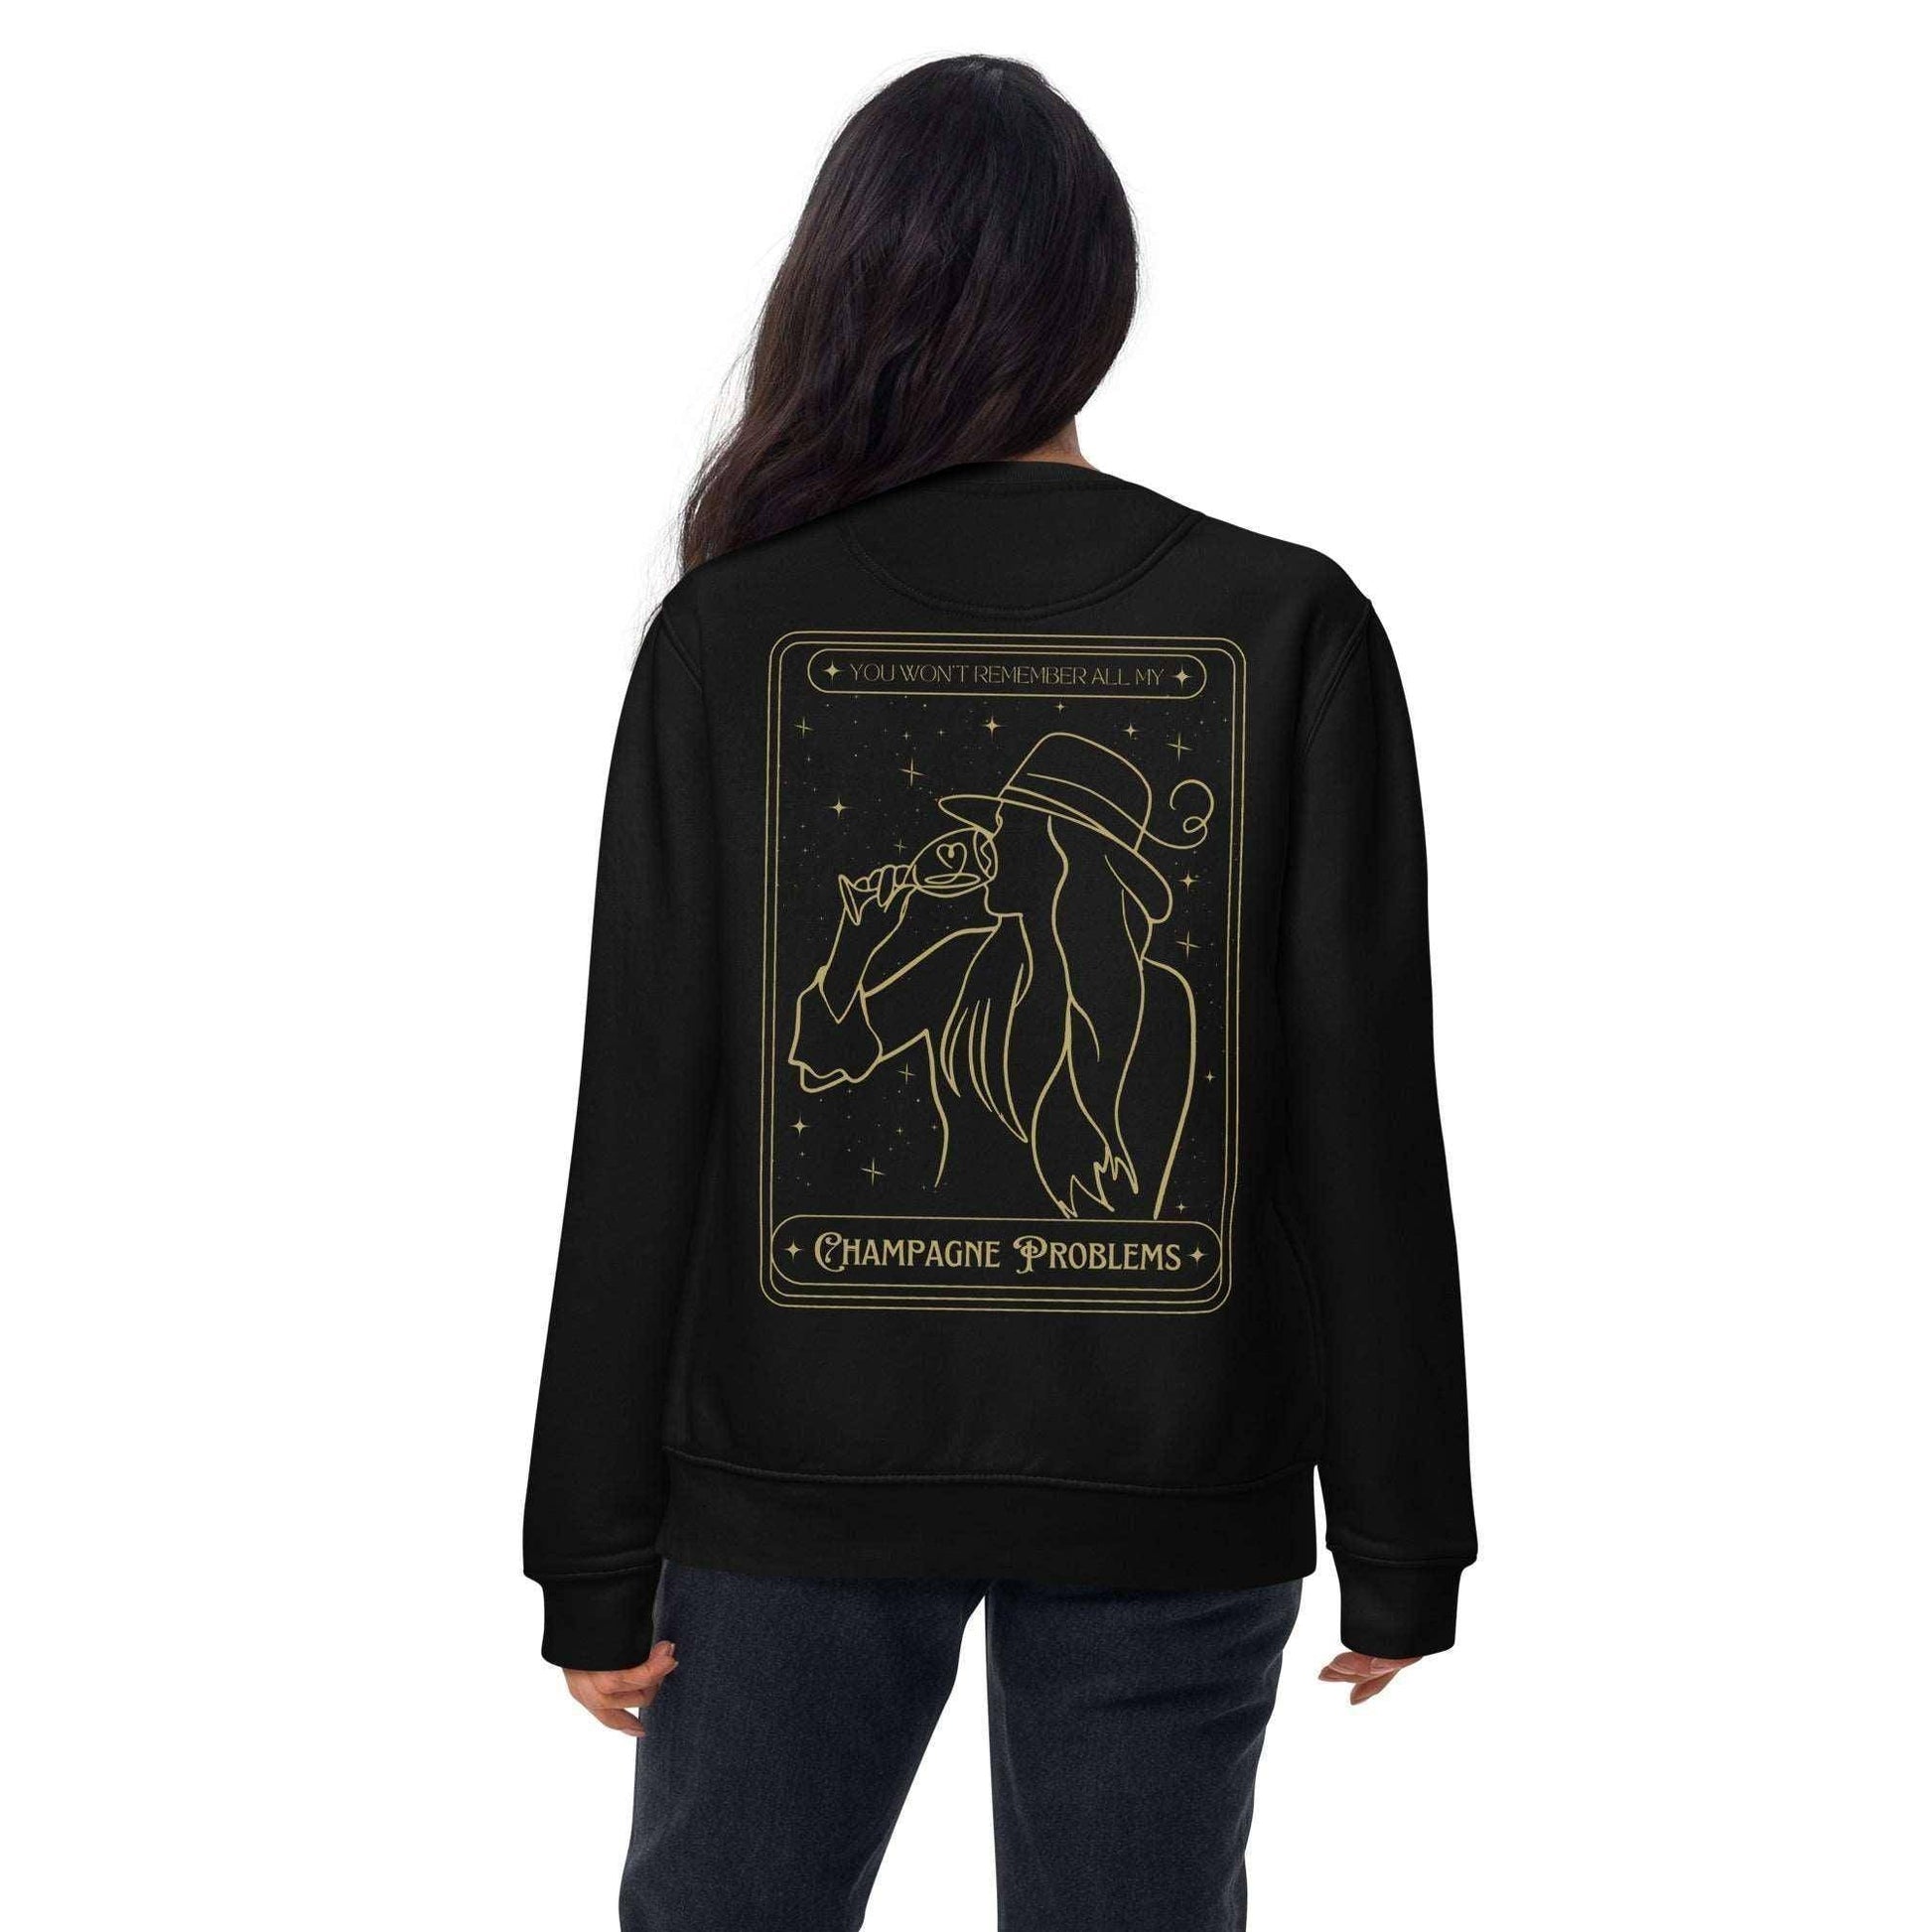 Taylor Swift Champagne Problems Embroidered Sweatshirt Black